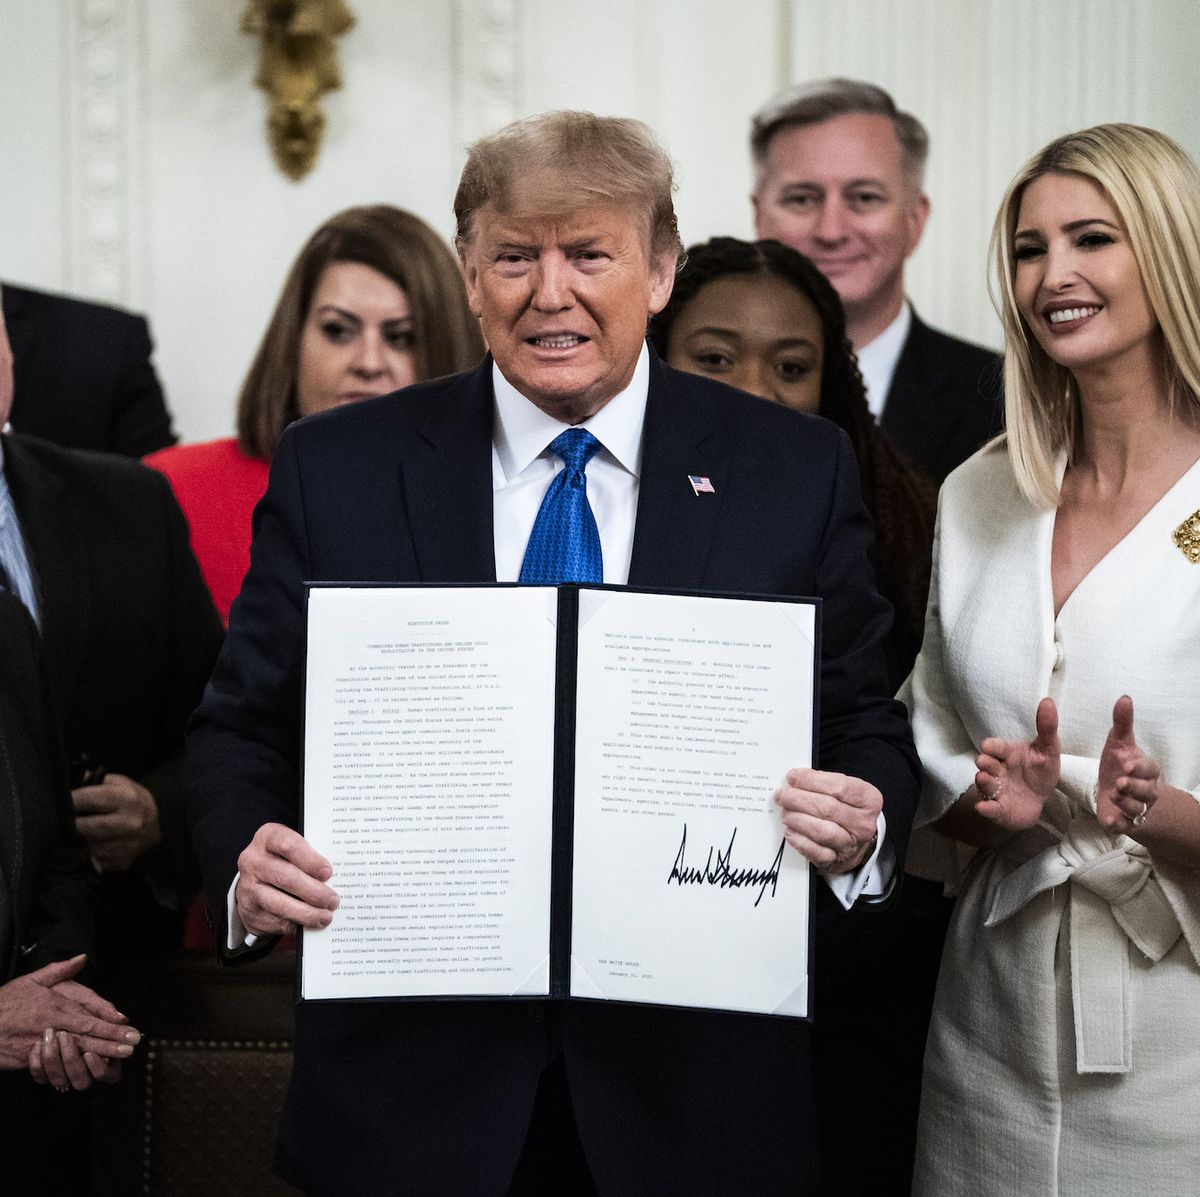 washington, dc   january 31  president donald j trump, with ivanka trump, signs an executive order after delivering remarks at the white house summit on human trafficking in the east room at the white house on friday, jan 31, 2020 in washington, dc photo by jabin botsfordthe washington post via getty images